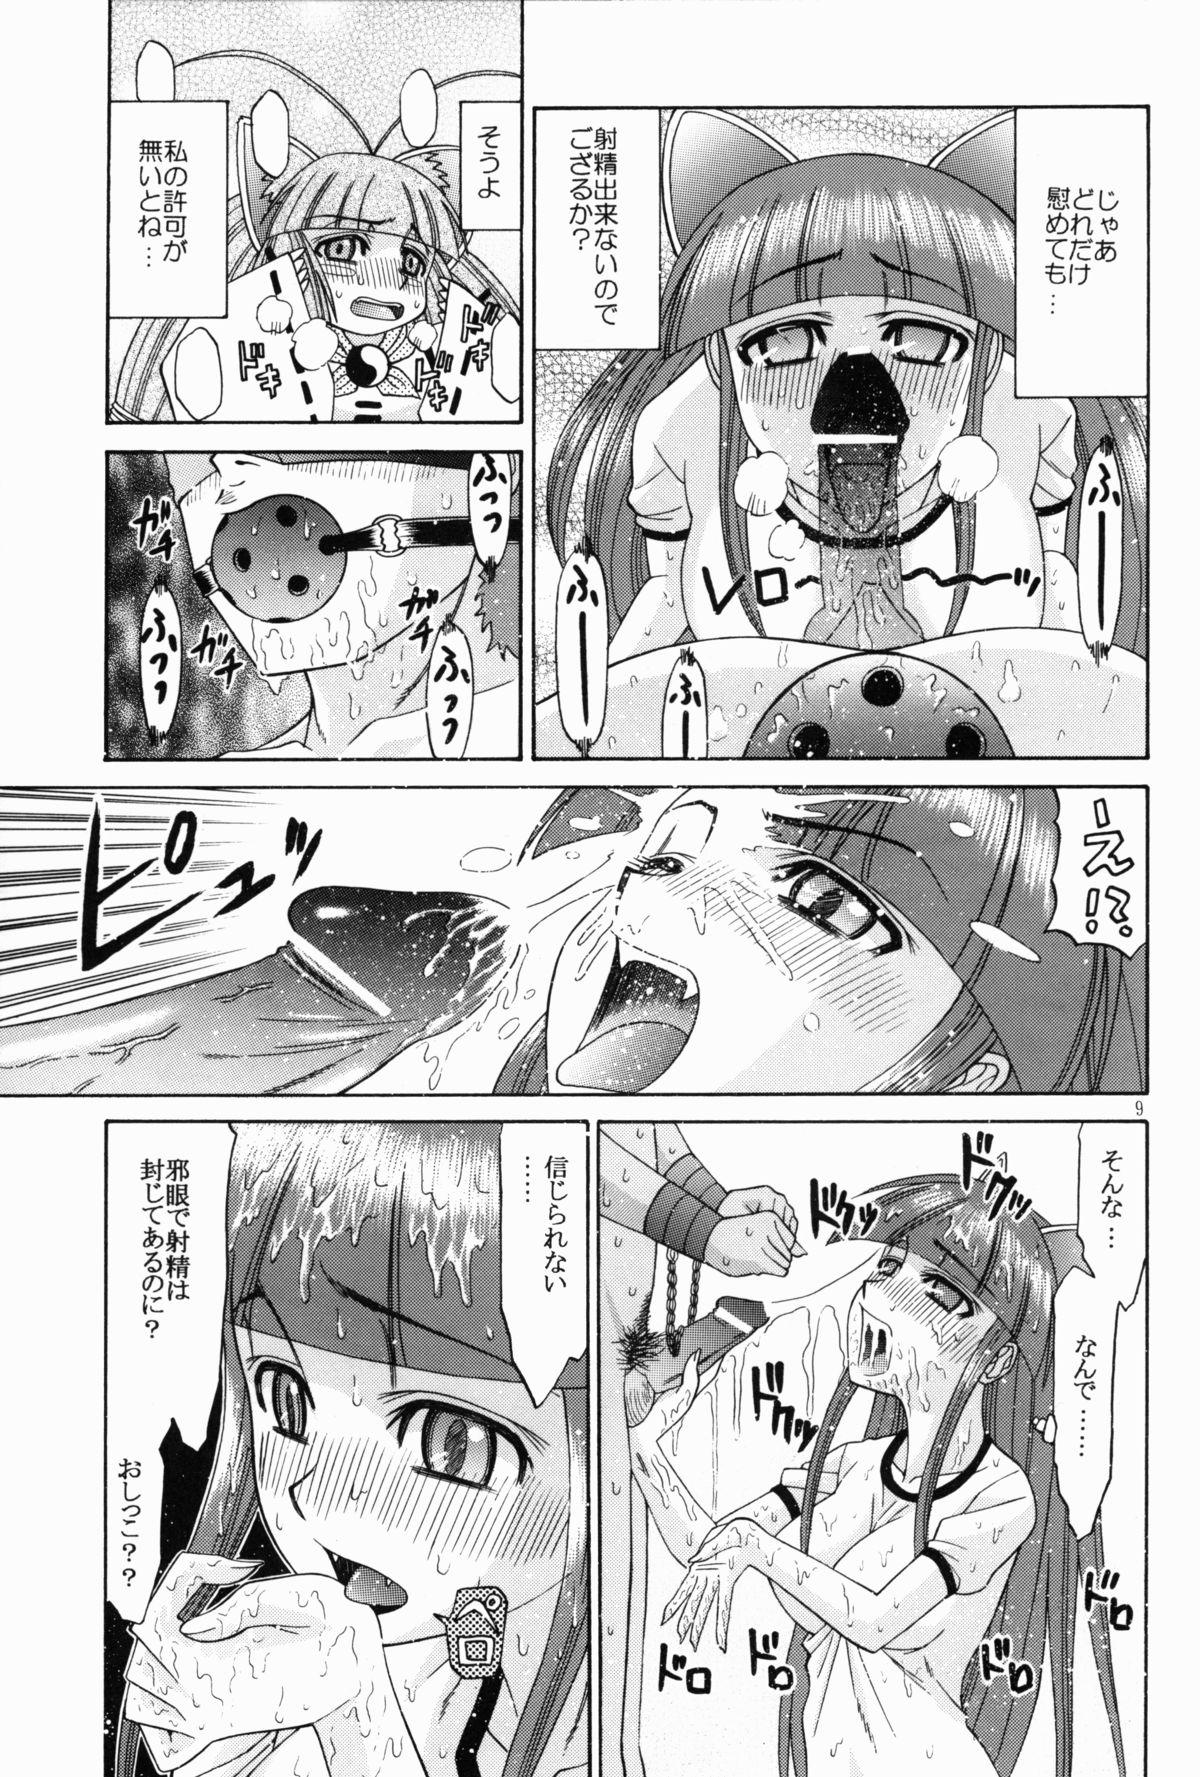 Sola moontribe 2 - Tsukuyomi moon phase Pussy To Mouth - Page 9